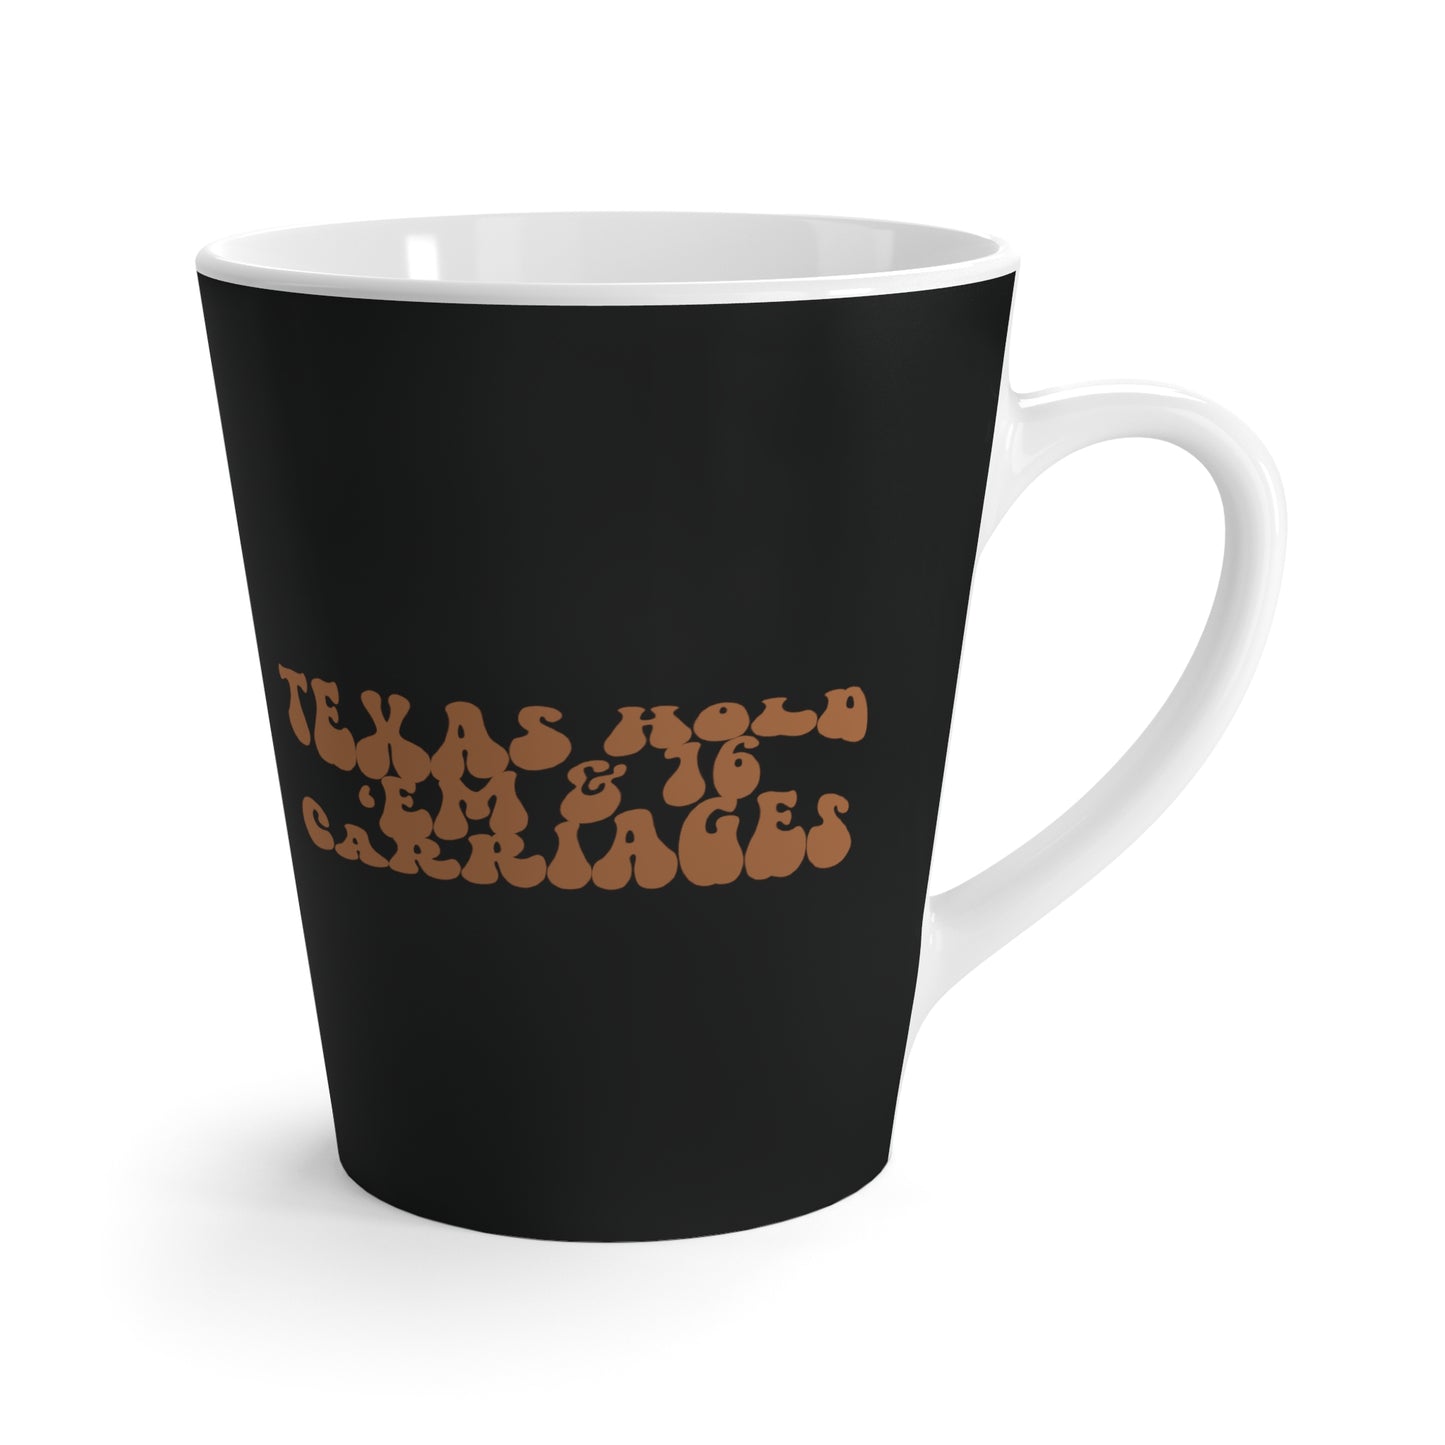 BEYONCE-INSPIRED COUNTRY, Western Graphic, Country Graphic, Black Women Country, Black Cowgirl Graphic, Beyonce Fan, Mother's Day, Gift for Her, Graphic Latte Mug